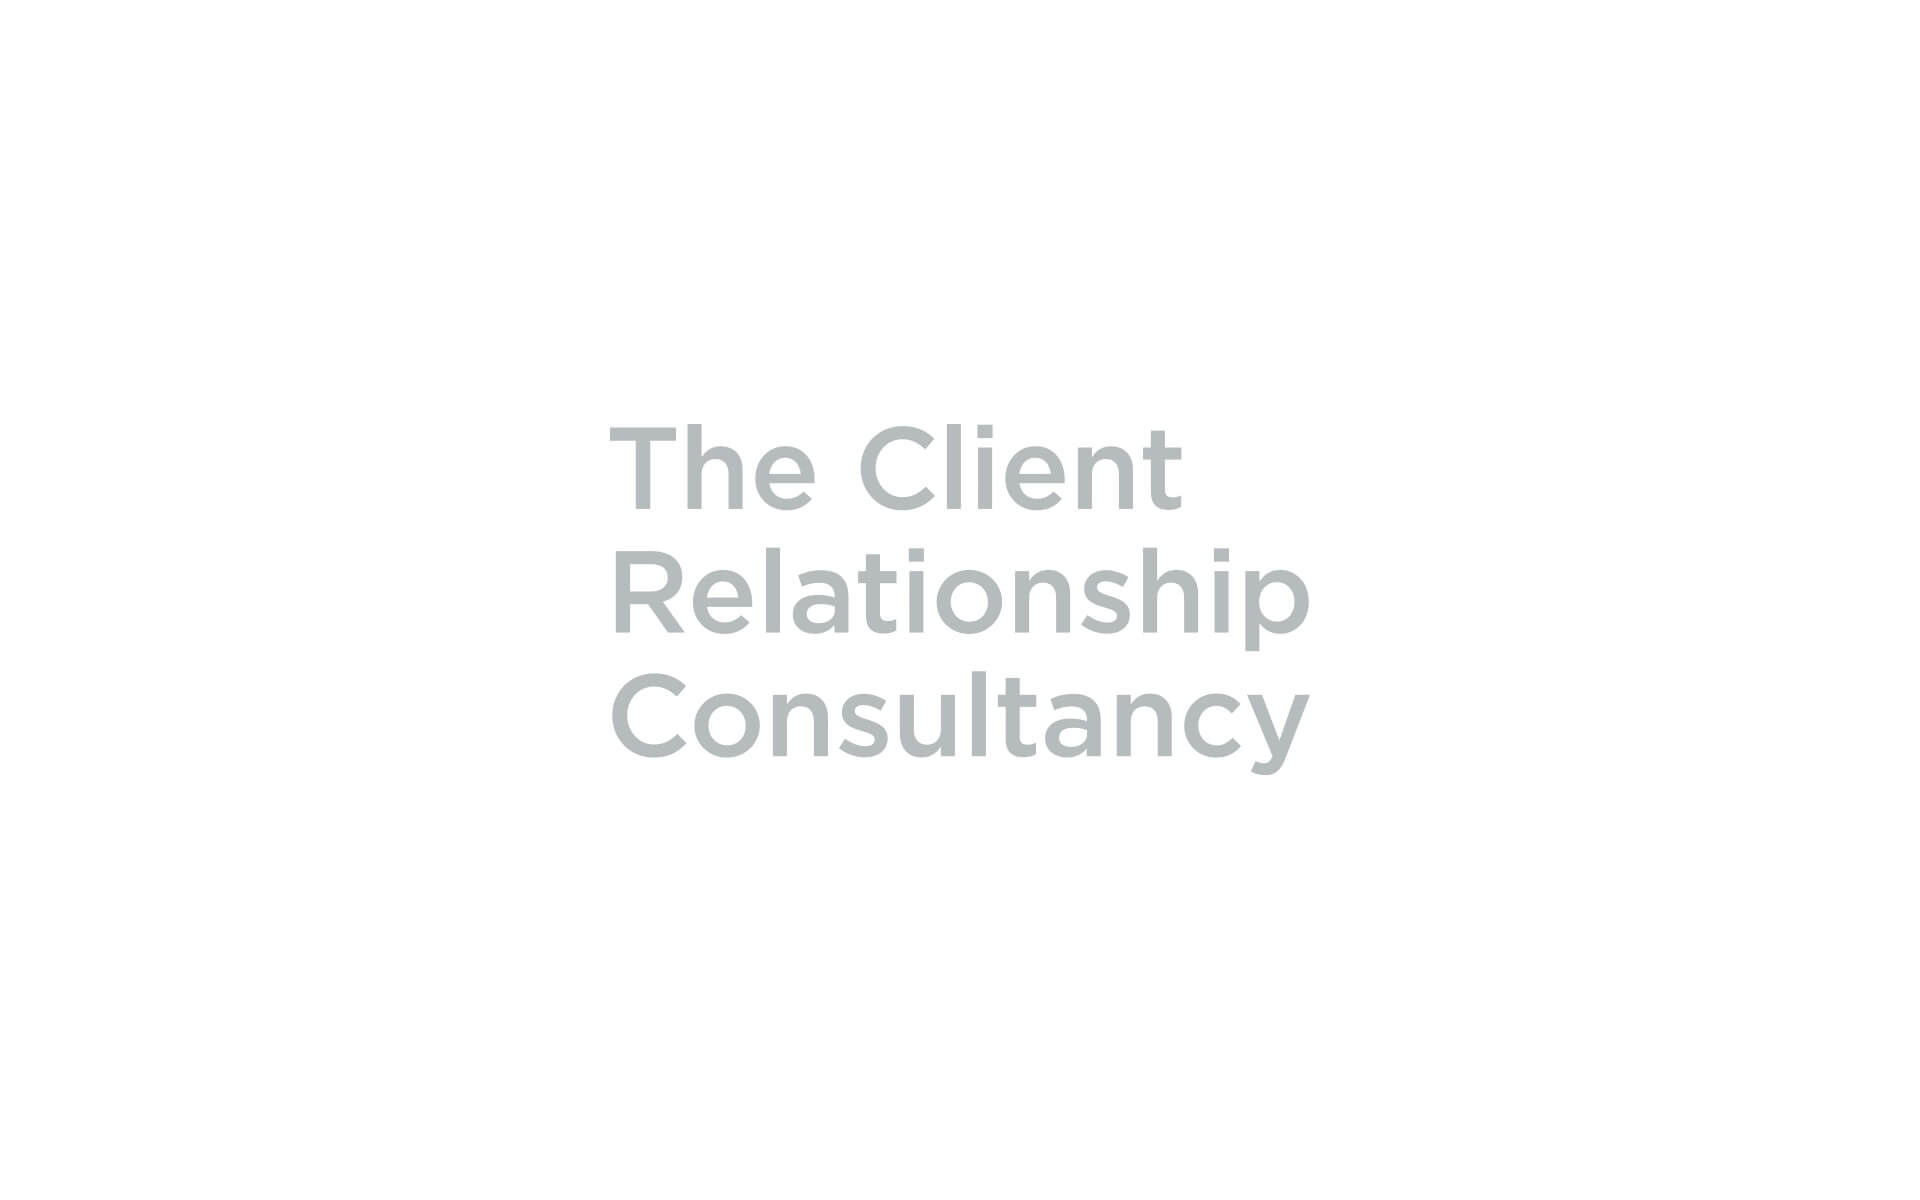 Philip_Mawer_Client_Relationship_Consultancy_01